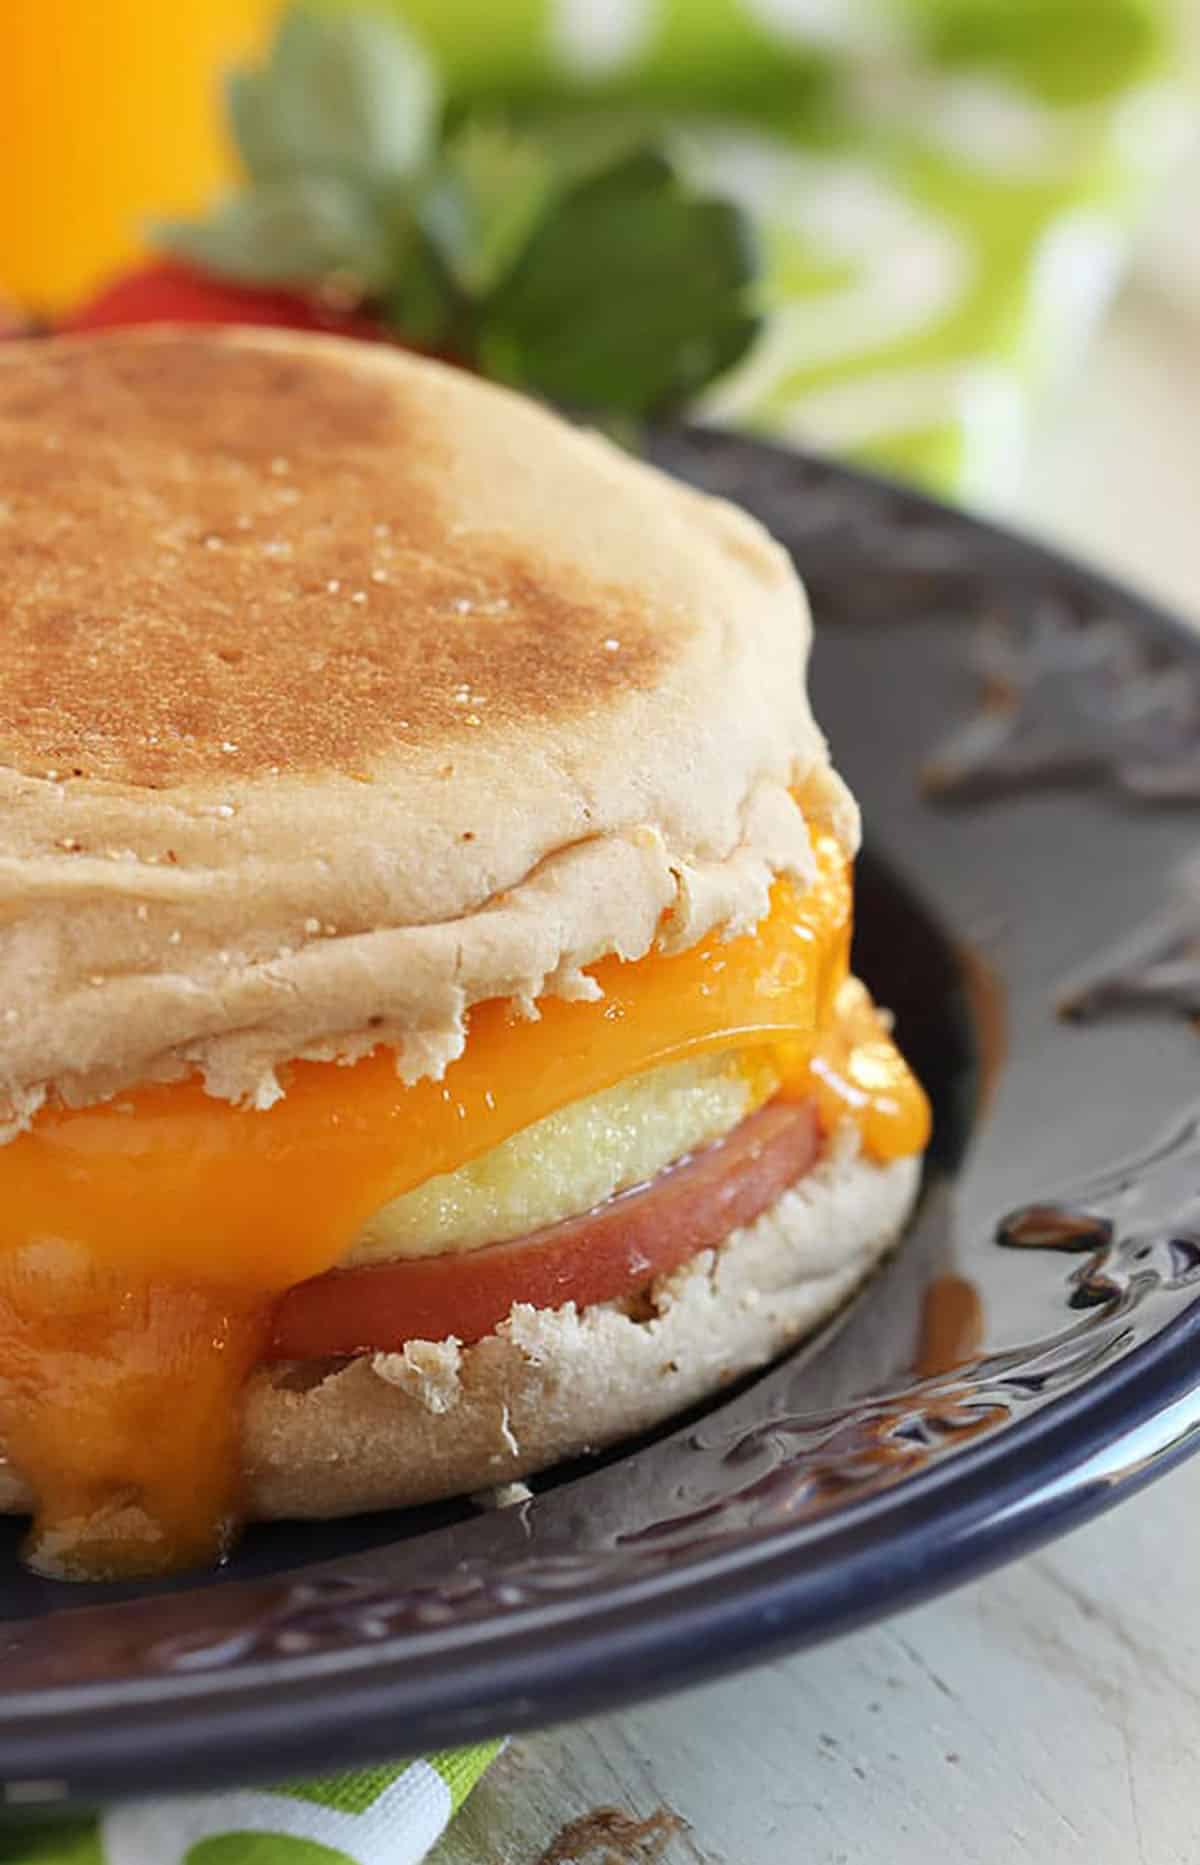 I can now create Homemade McMuffins' with award-winning breakfast